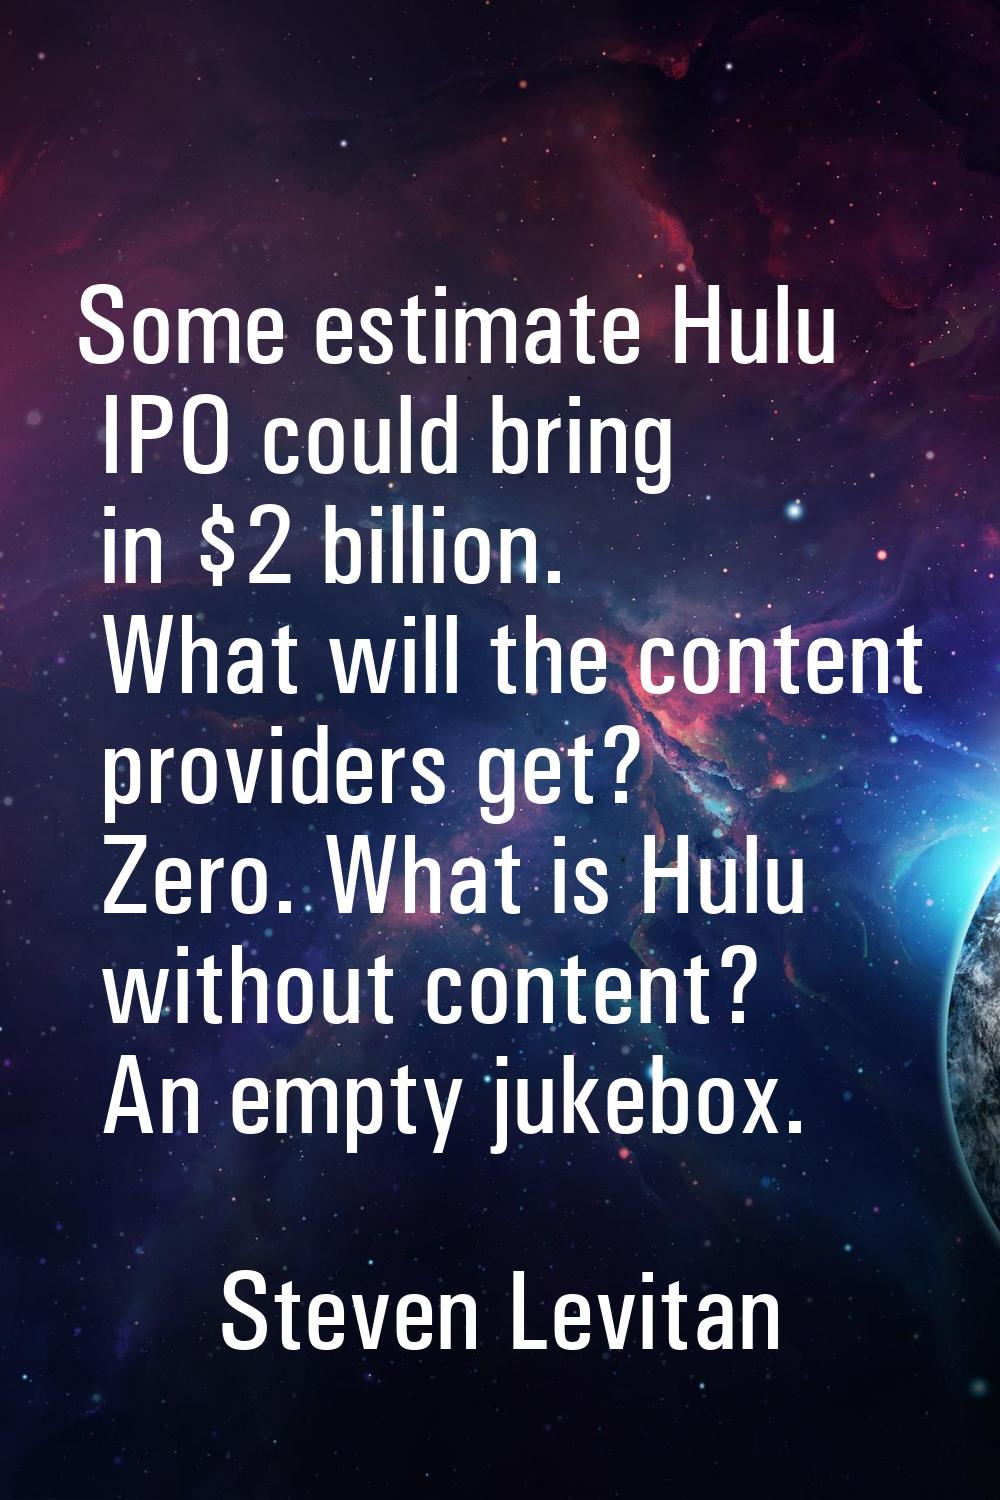 Some estimate Hulu IPO could bring in $2 billion. What will the content providers get? Zero. What i